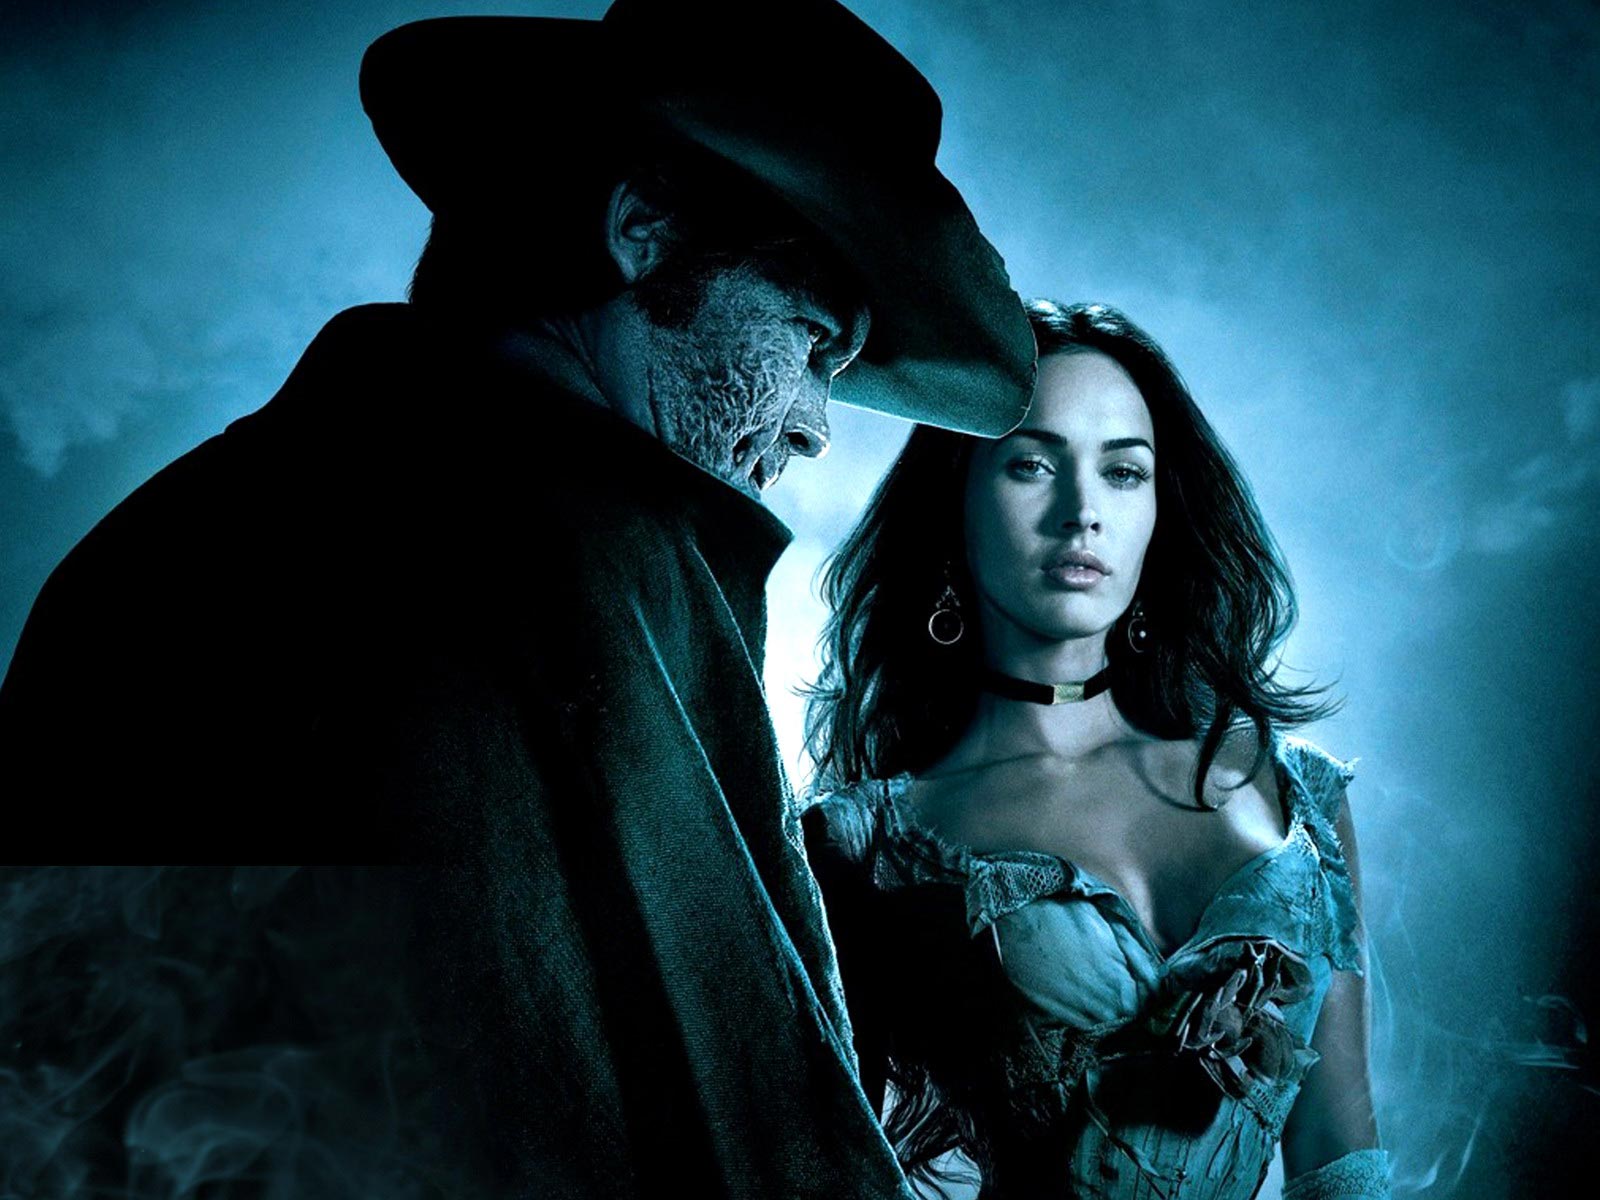 You are here: Home » Movie News » Jonah Hex Wallpaper